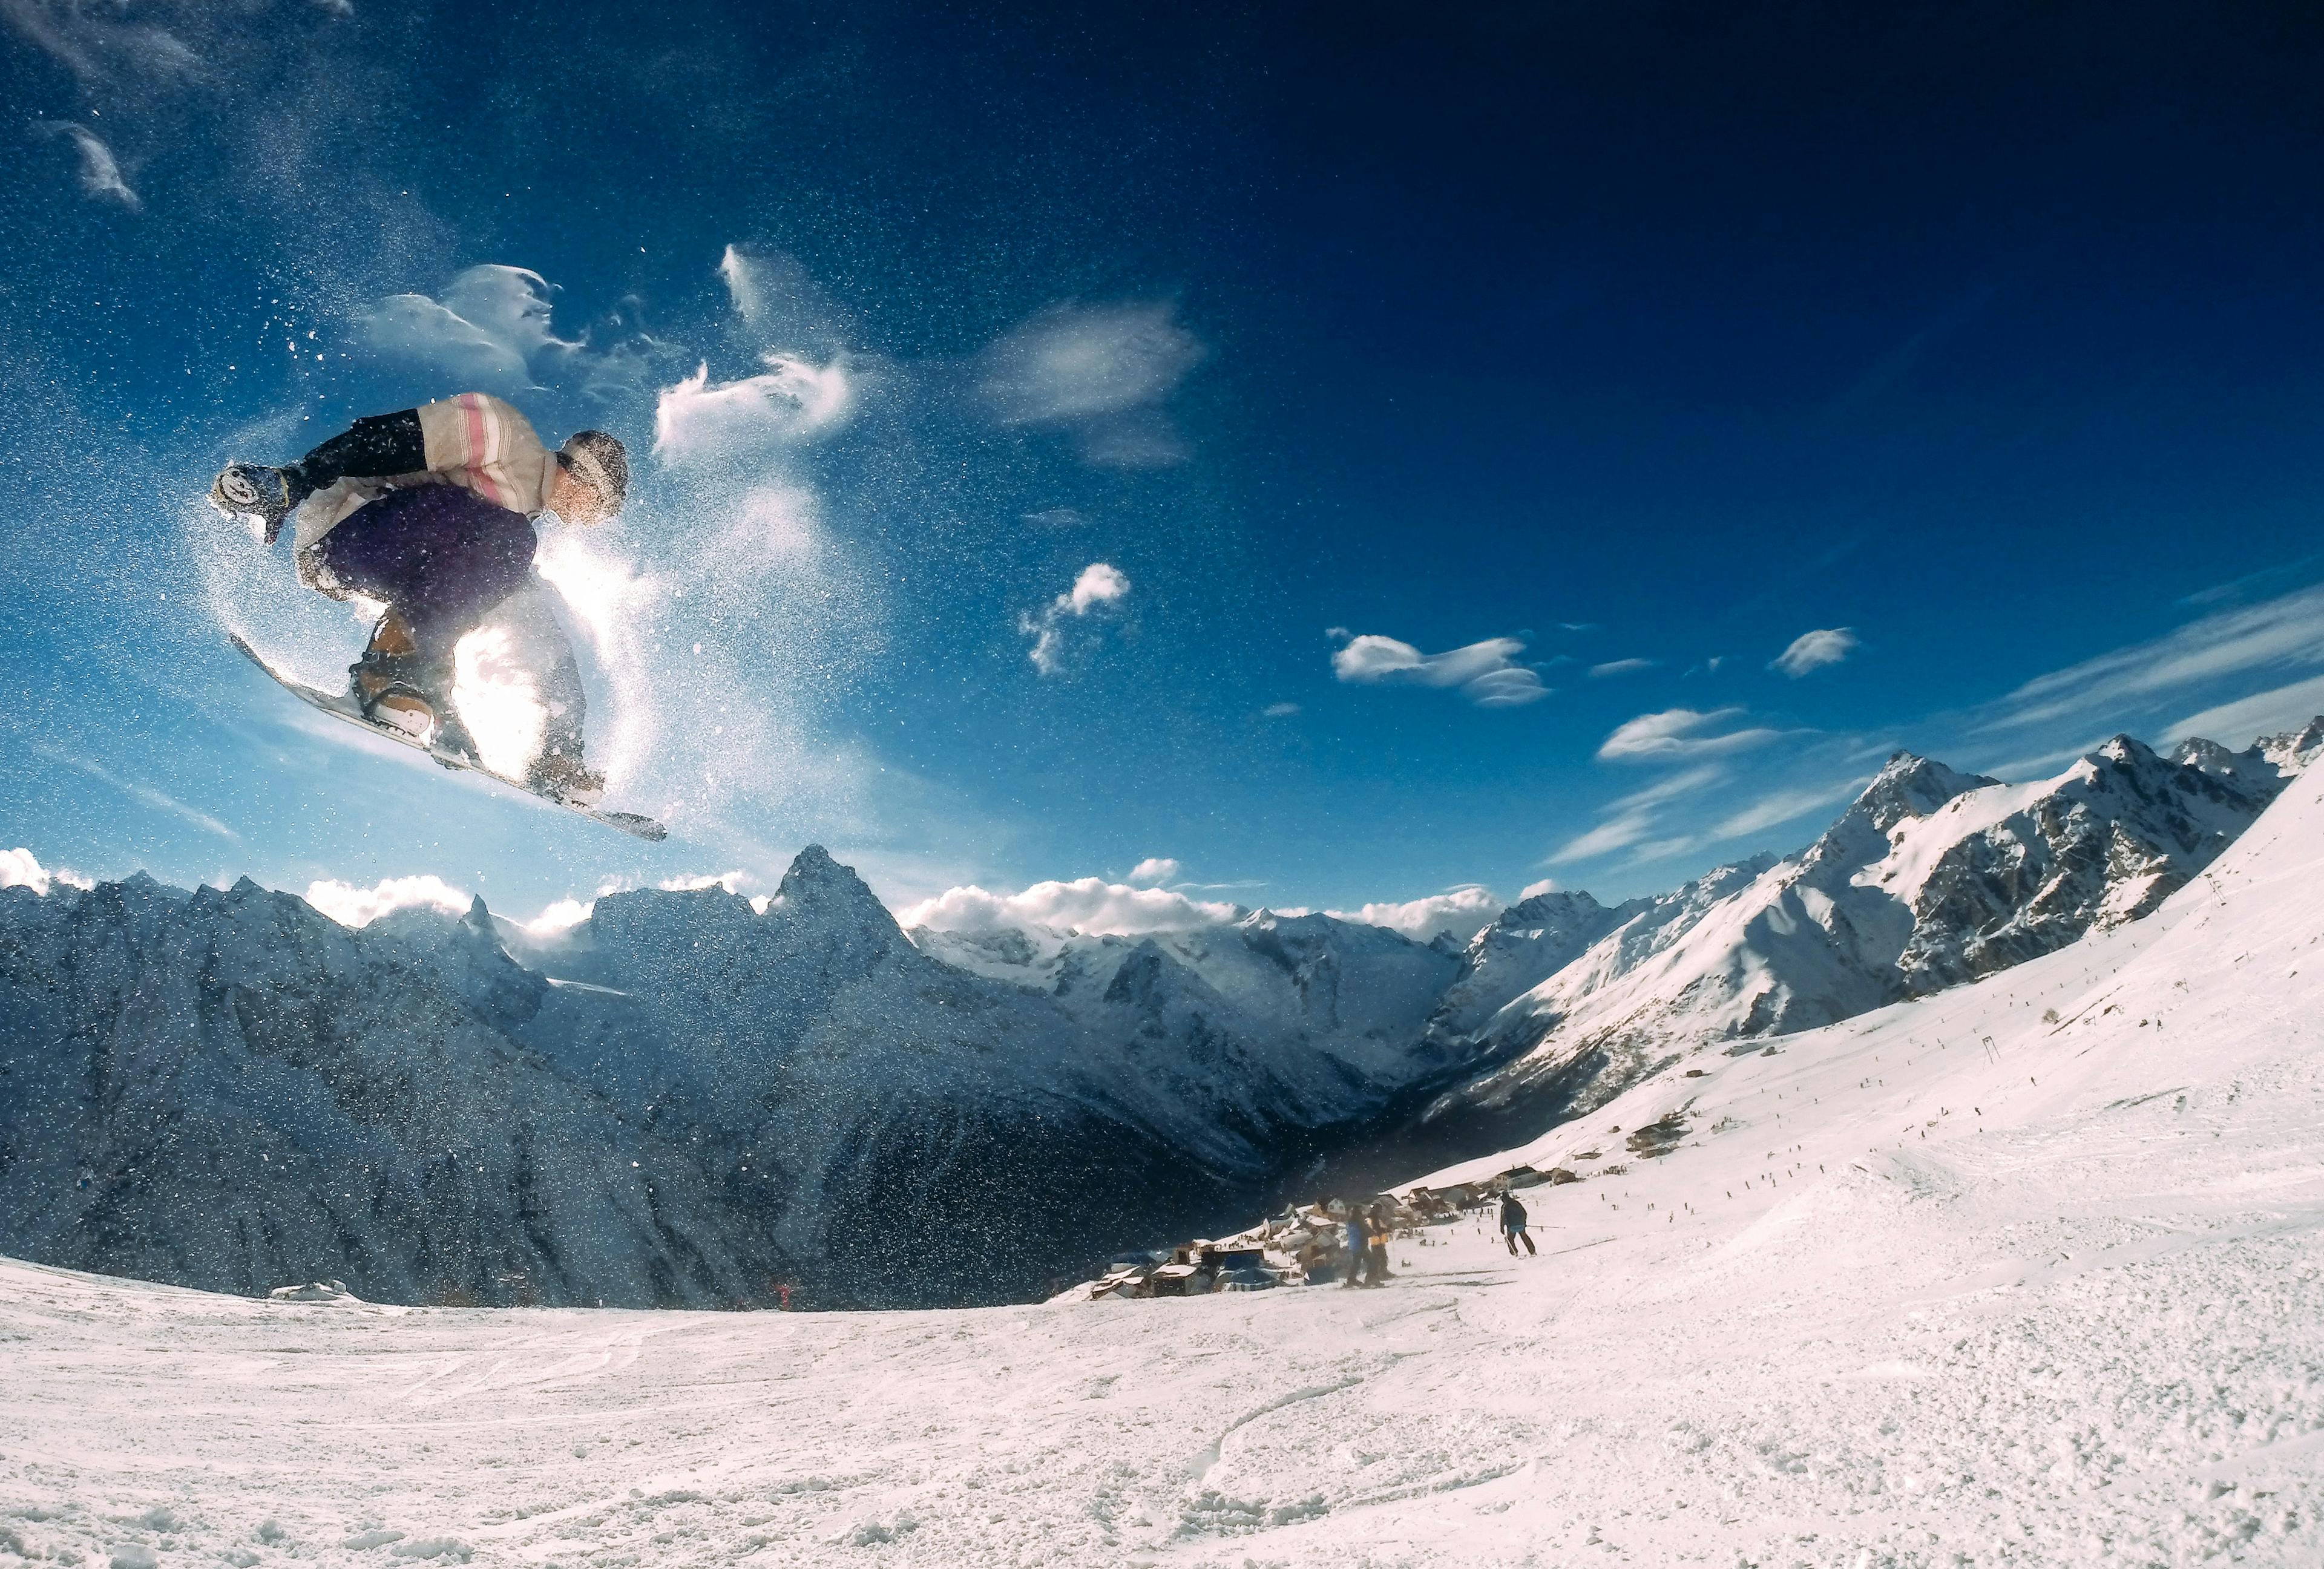 Snowboarder catching air on jump